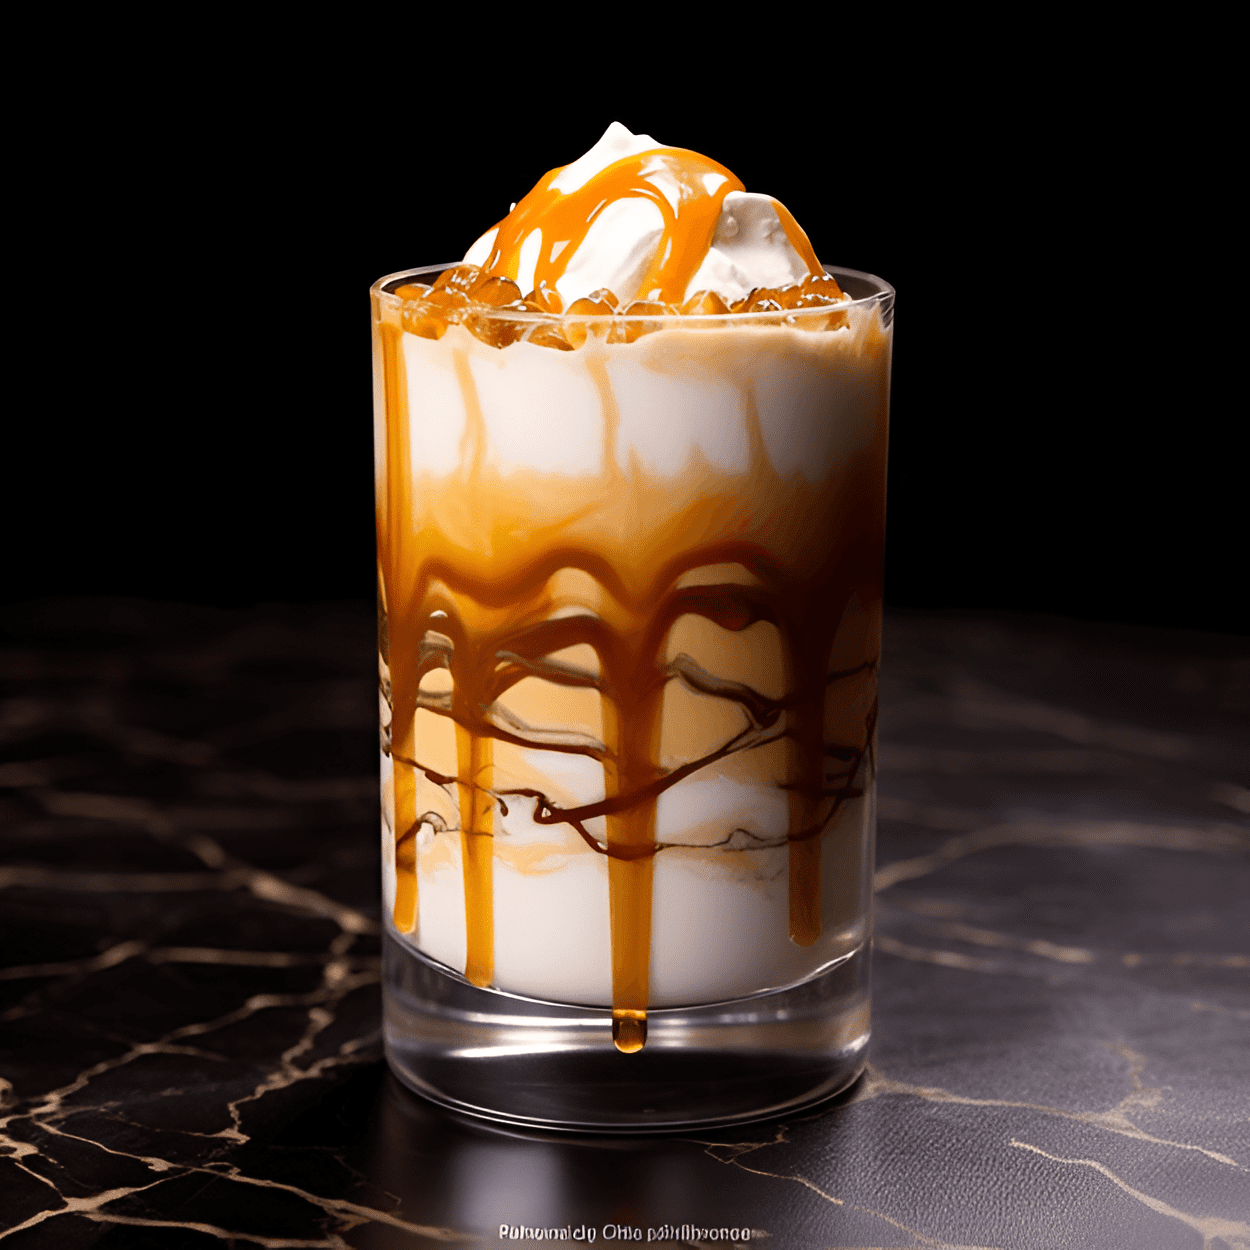 Salted Caramel White Russian Cocktail Recipe - The Salted Caramel White Russian is a rich, creamy, and sweet cocktail with a hint of saltiness. The caramel and cream give it a smooth, velvety texture, while the vodka provides a subtle kick. The coffee liqueur adds depth and complexity to the flavor profile.